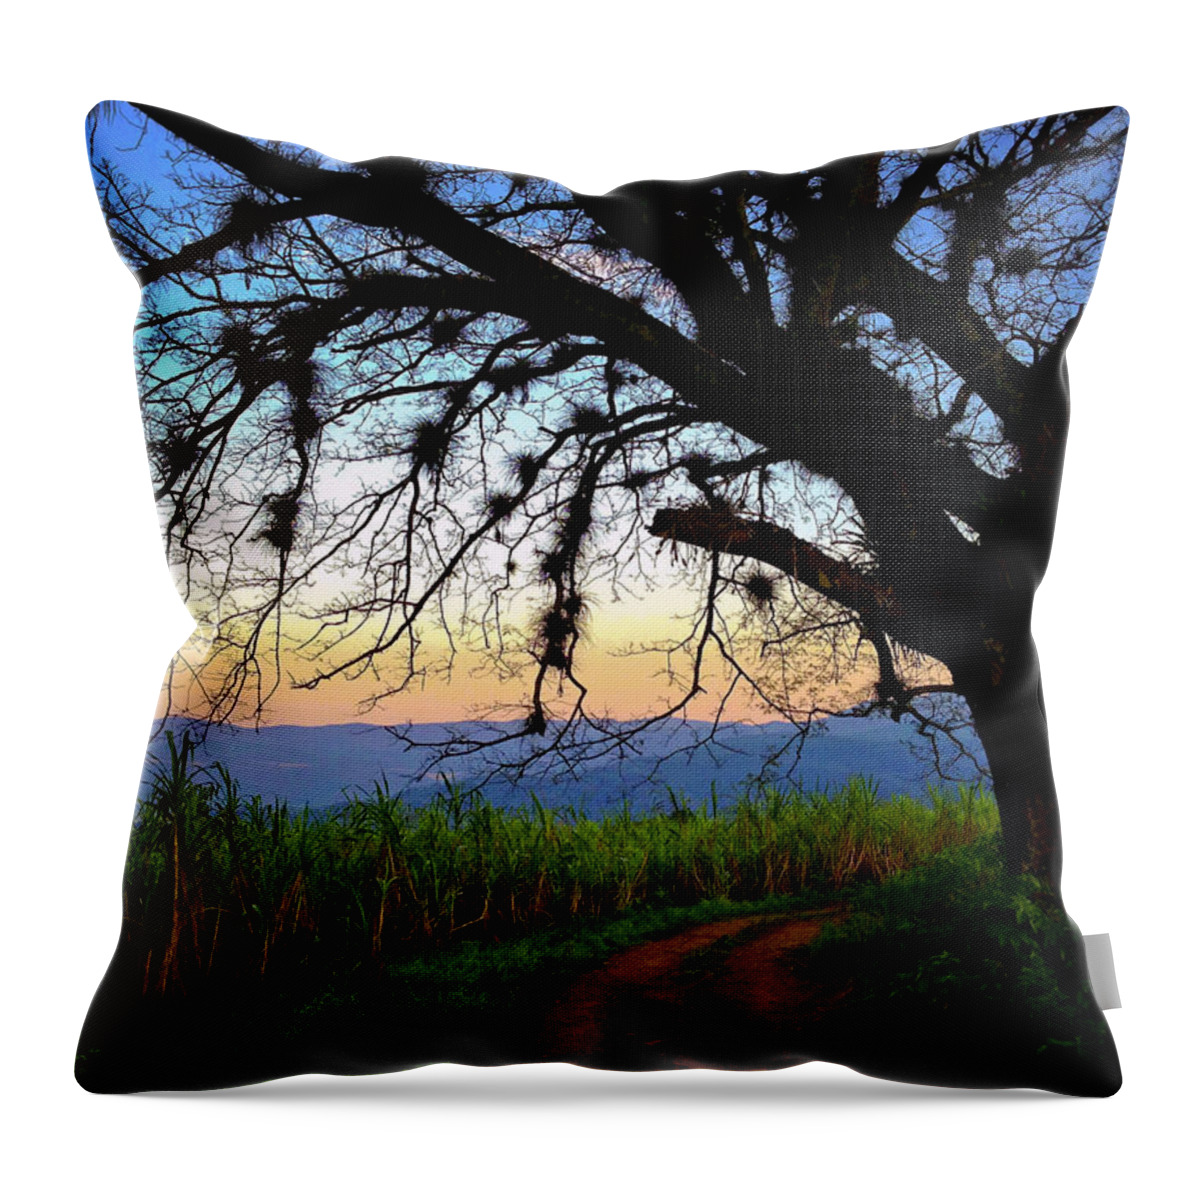 The Road Less Traveled Throw Pillow featuring the photograph The Road Less Traveled by Skip Hunt